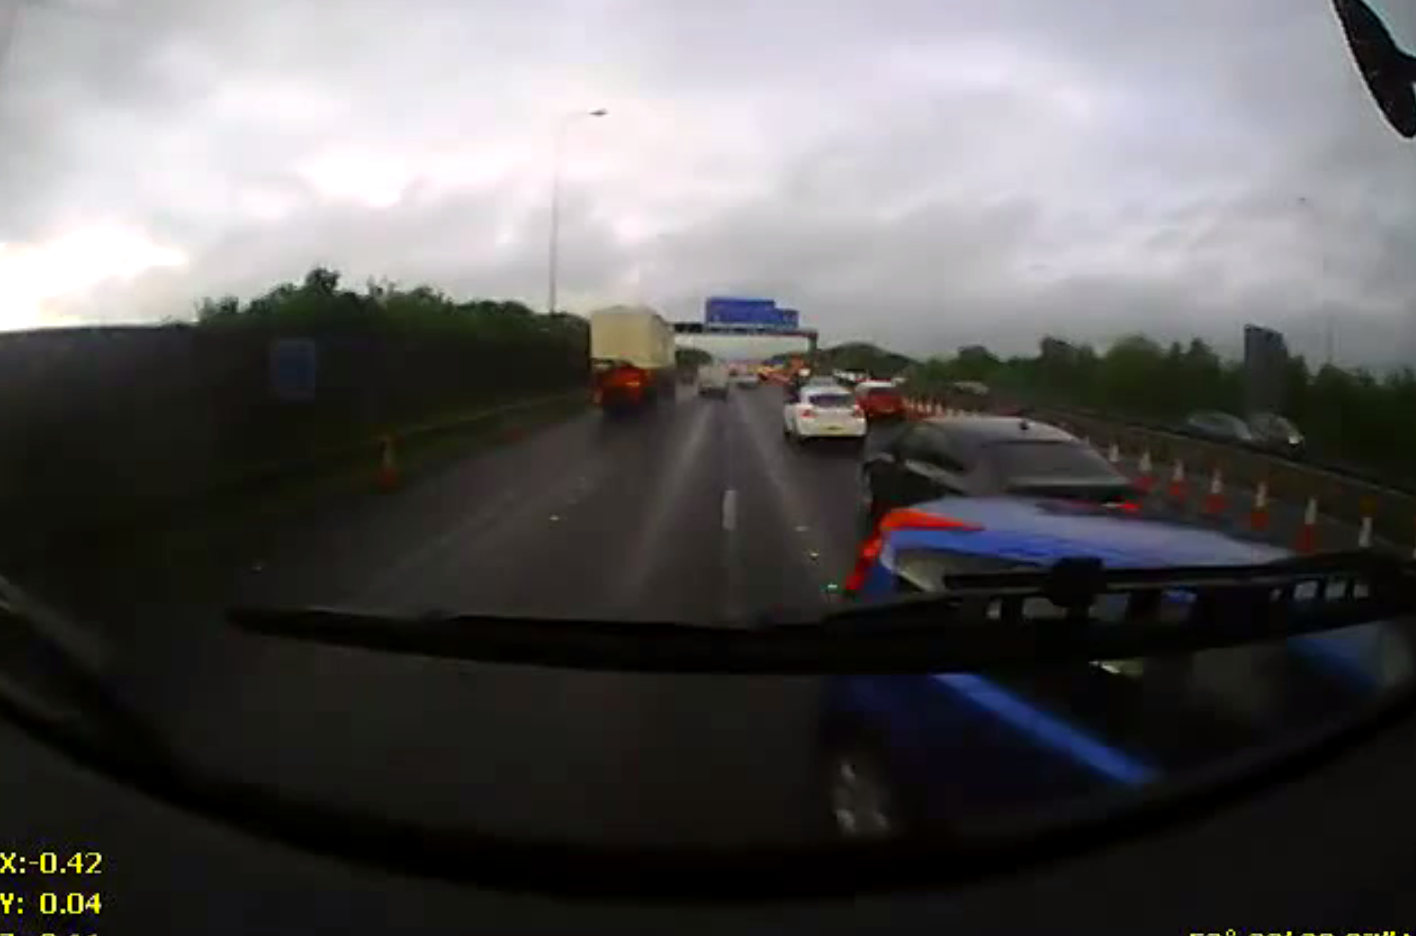 A dozy driver nearly injured a number of motorists